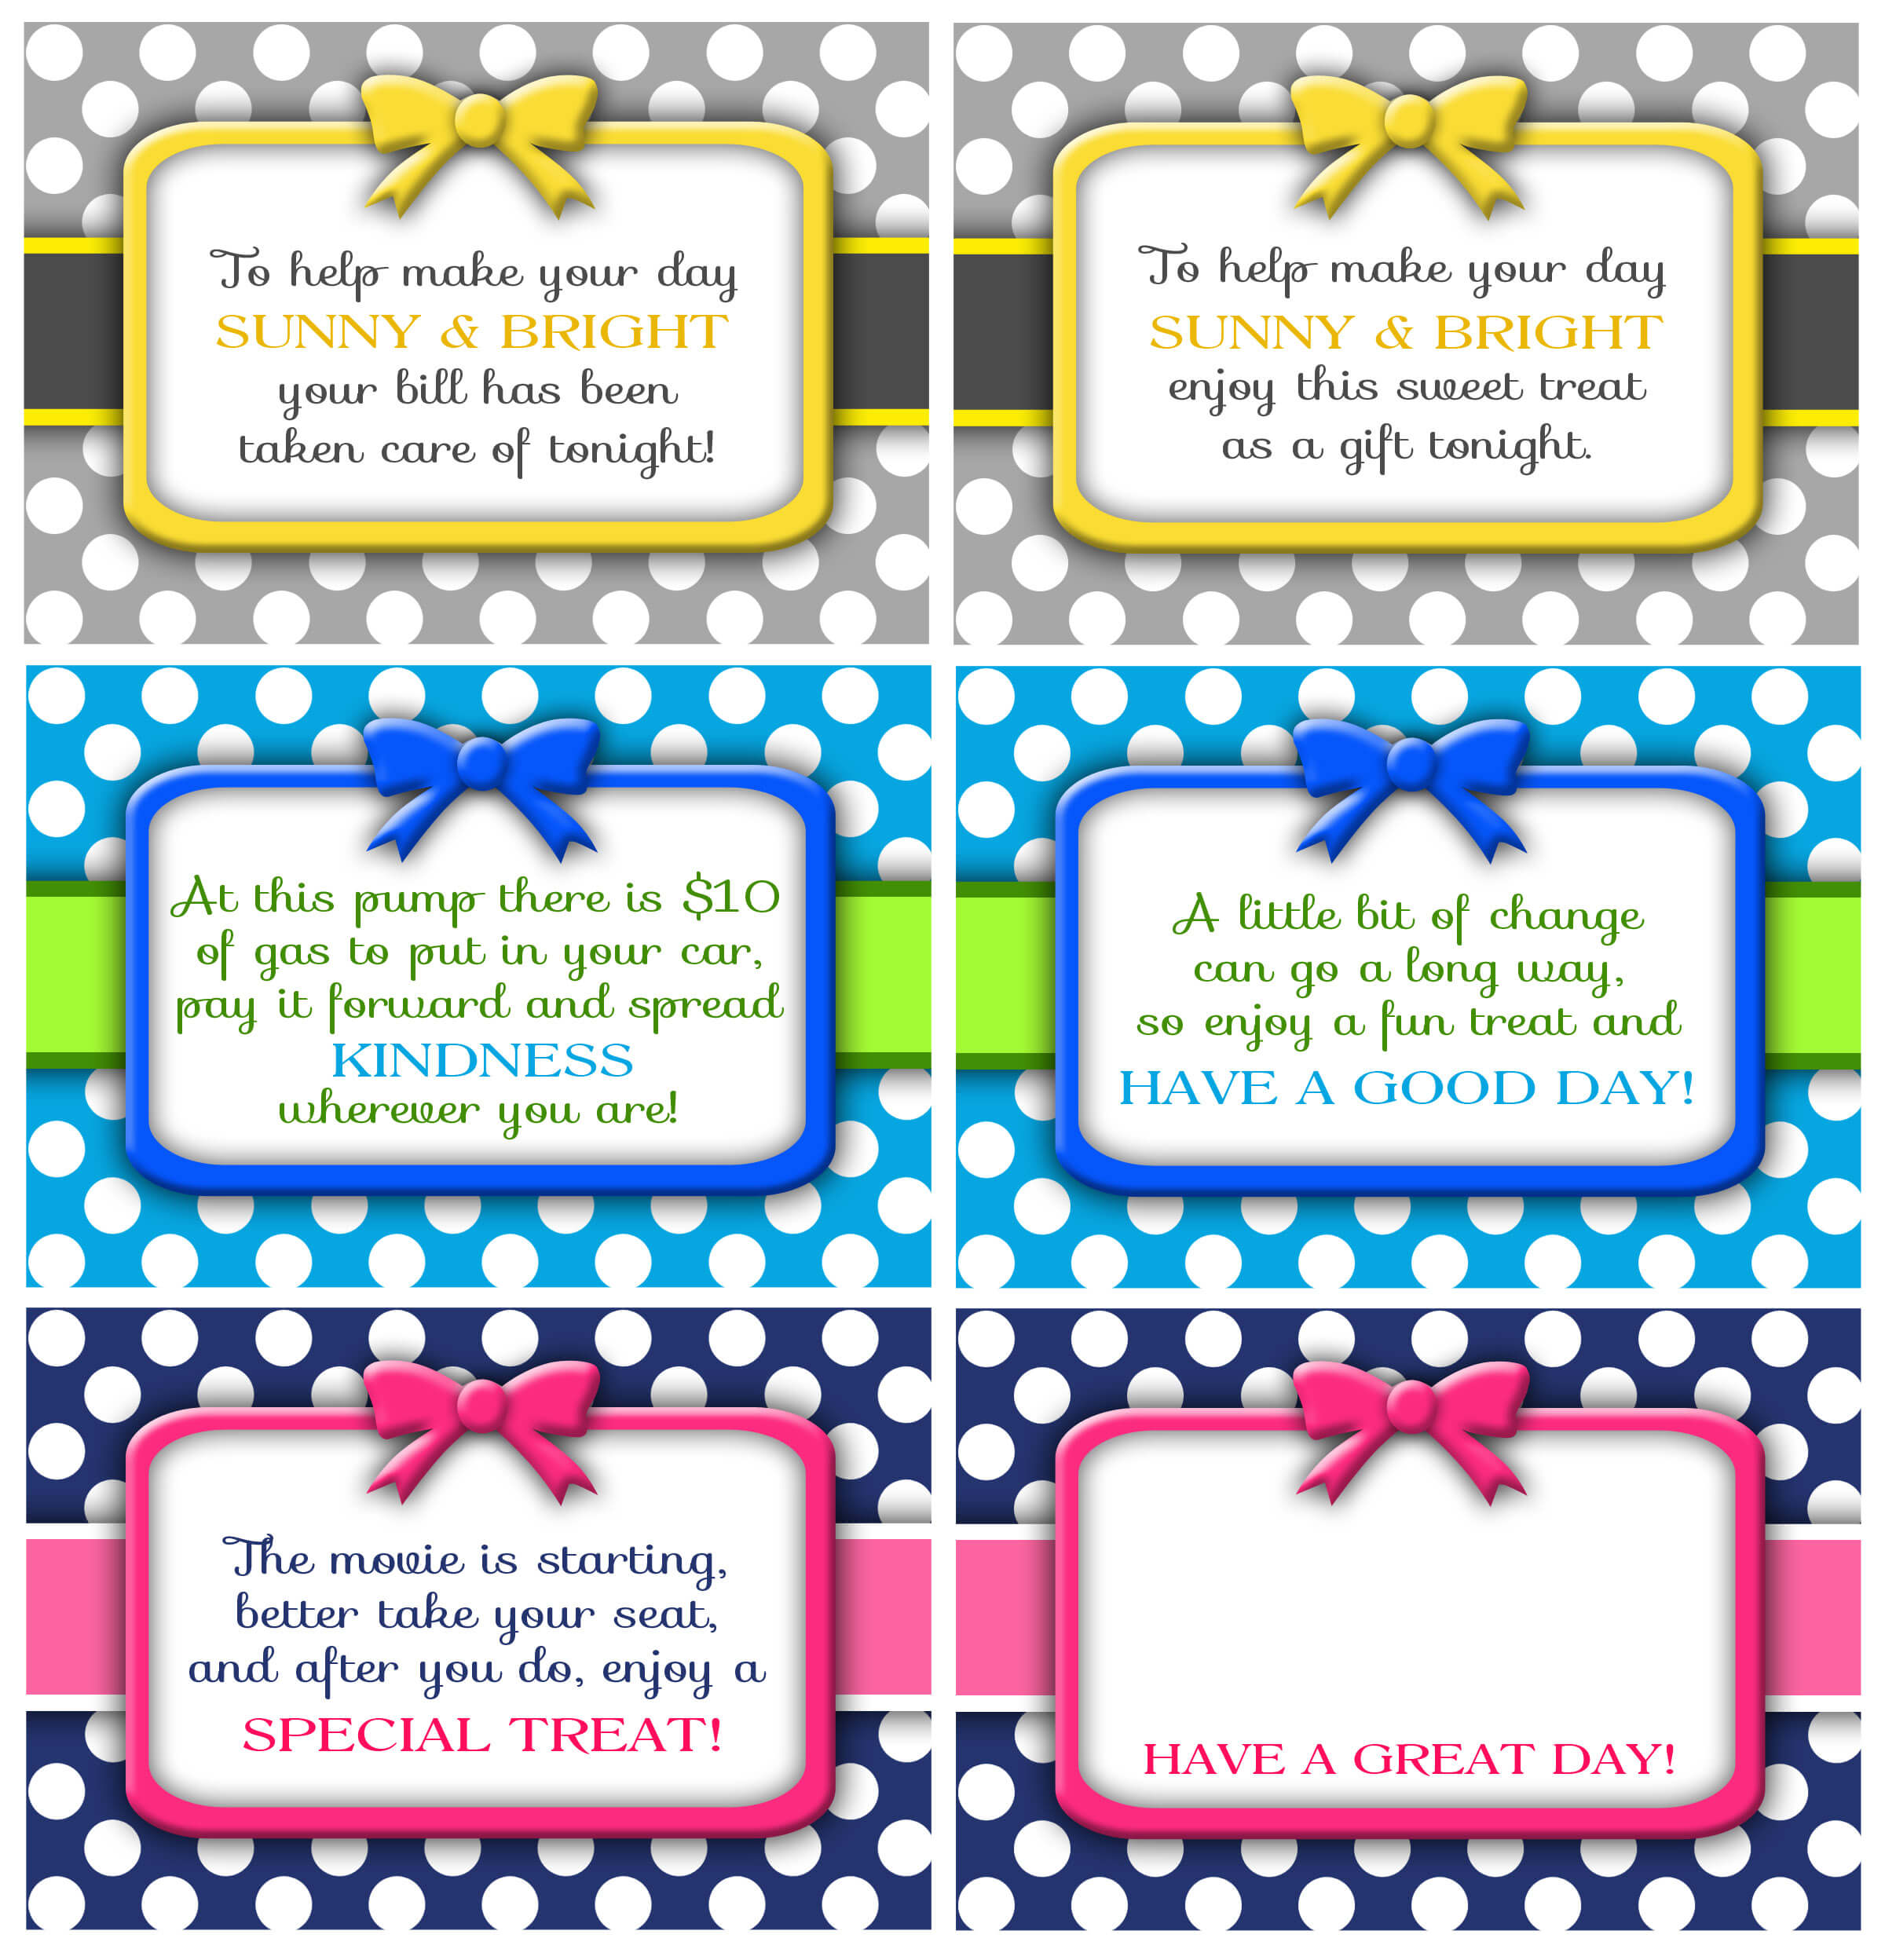 Random Acts Of Kindness Card Designs - Yeppe In Random Acts Of Kindness Cards Templates